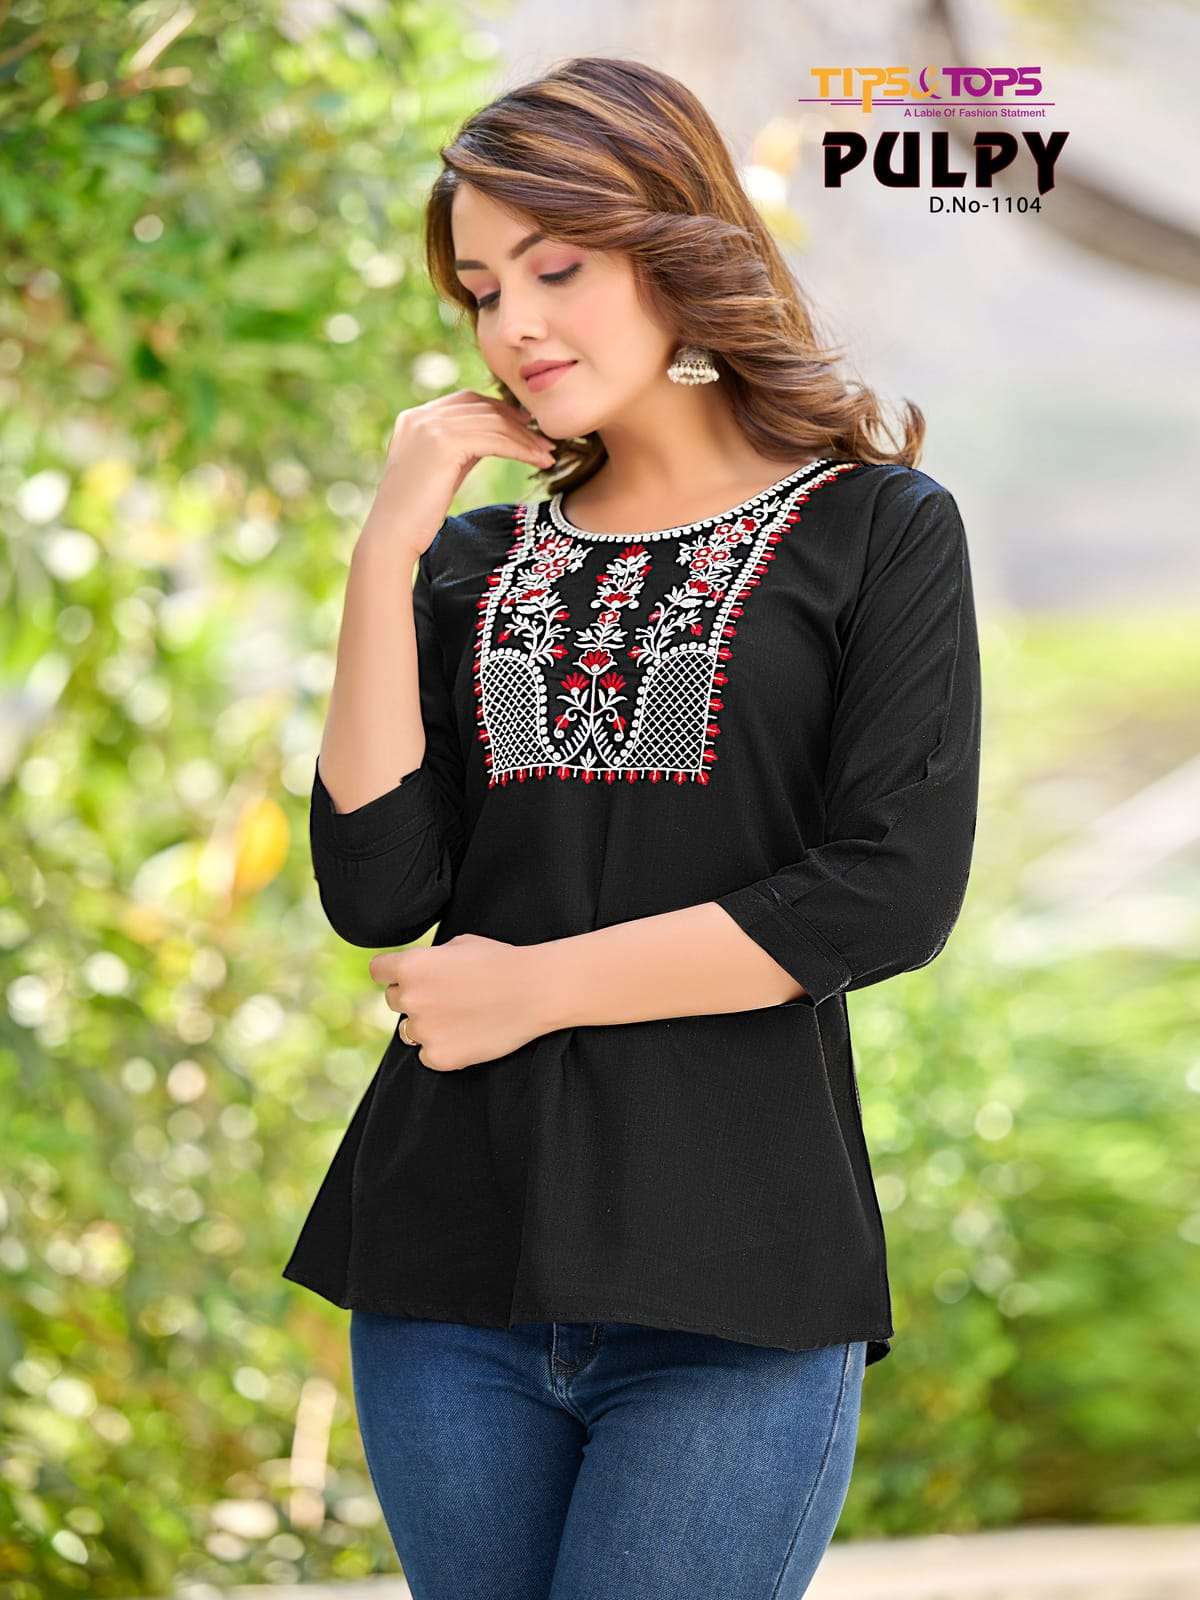 tips&tops pulpy vol-11 heavy rayon desoigner short tops collection wholesale price 